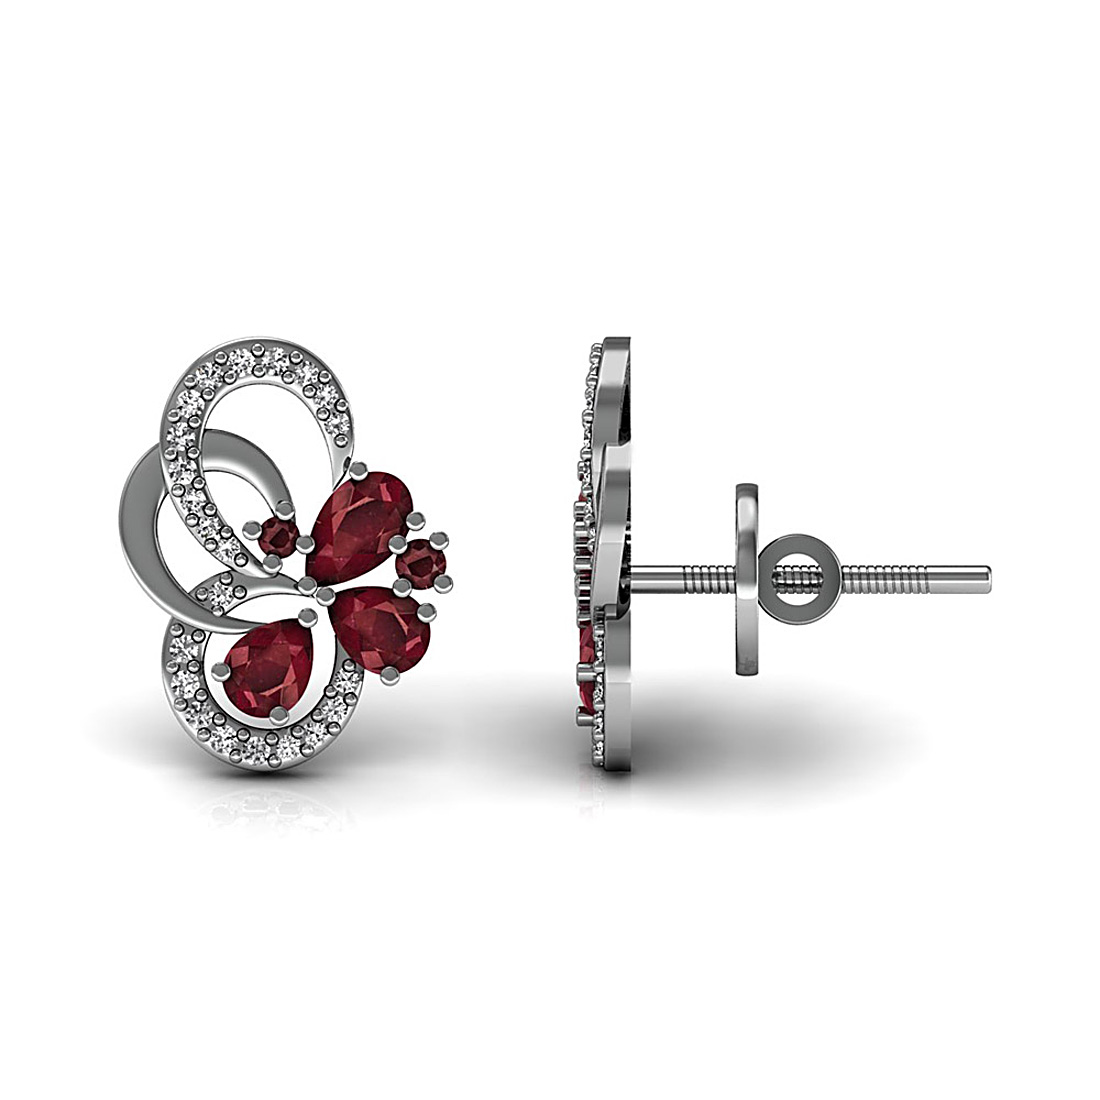 Stud earrings studded with natural ruby gemstone and made in 18k solid white gold.